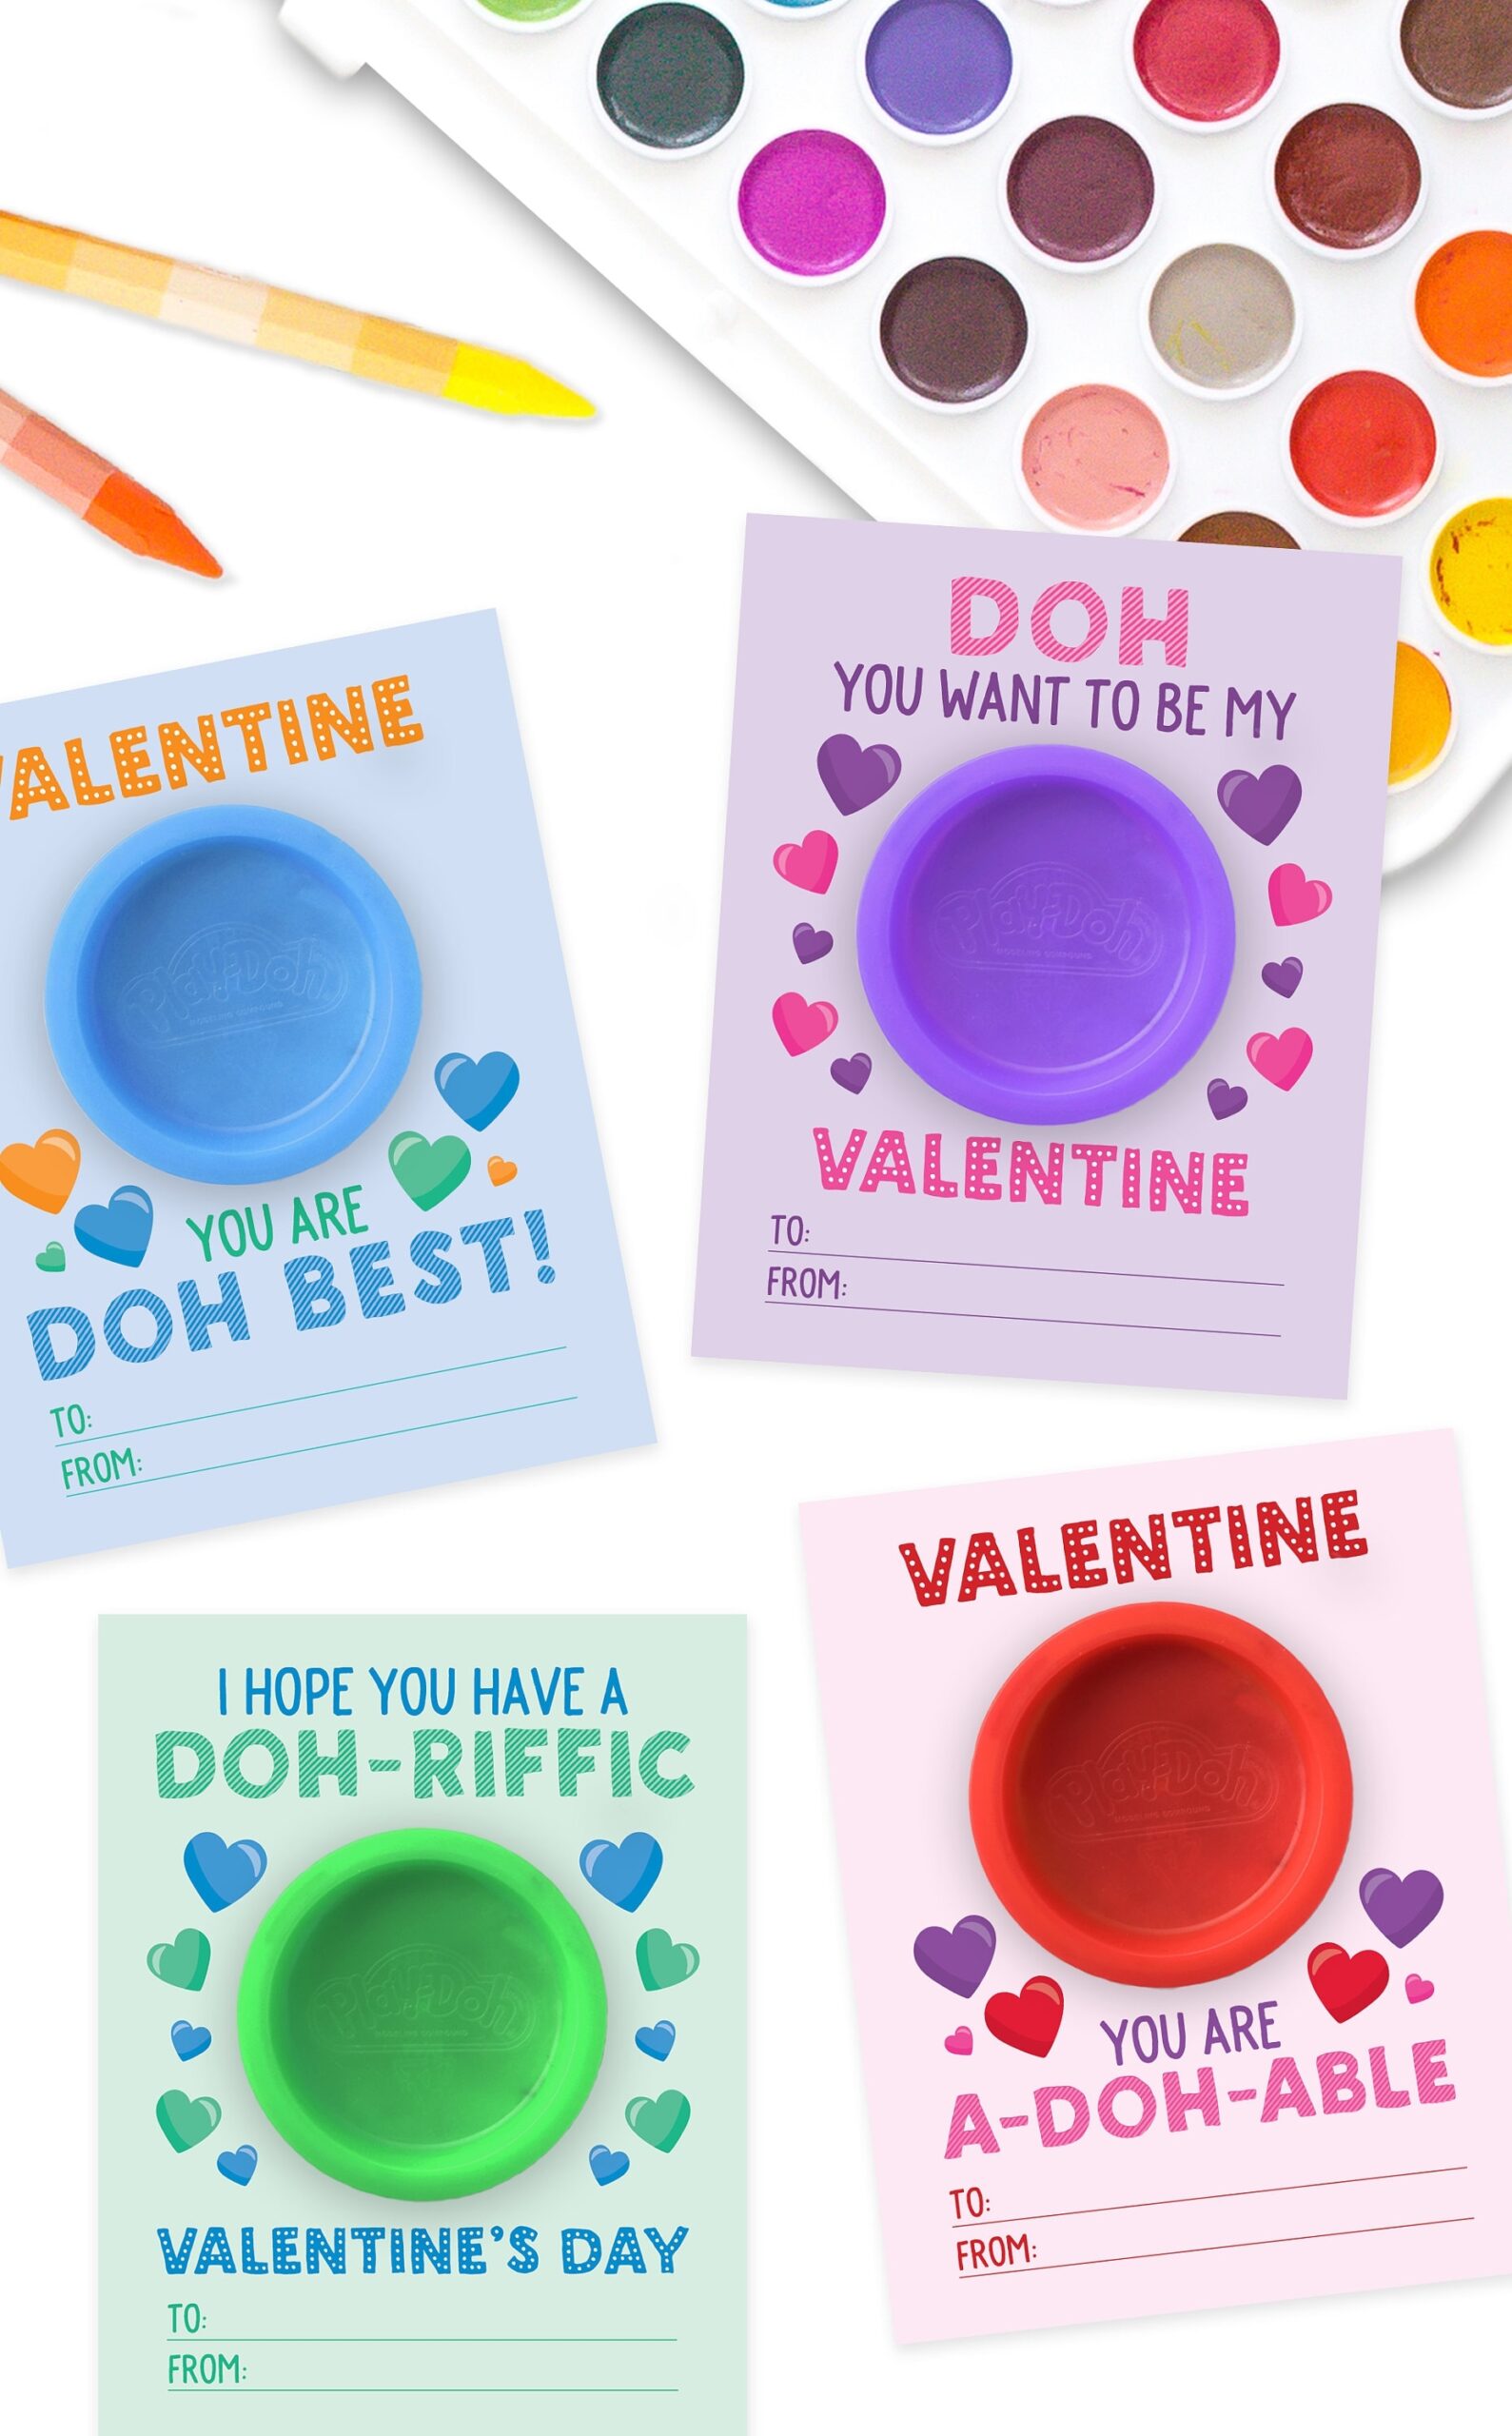 Printable Play Doh Valentines Day Cards For Kids Non candy Classroom Valentines Etsy